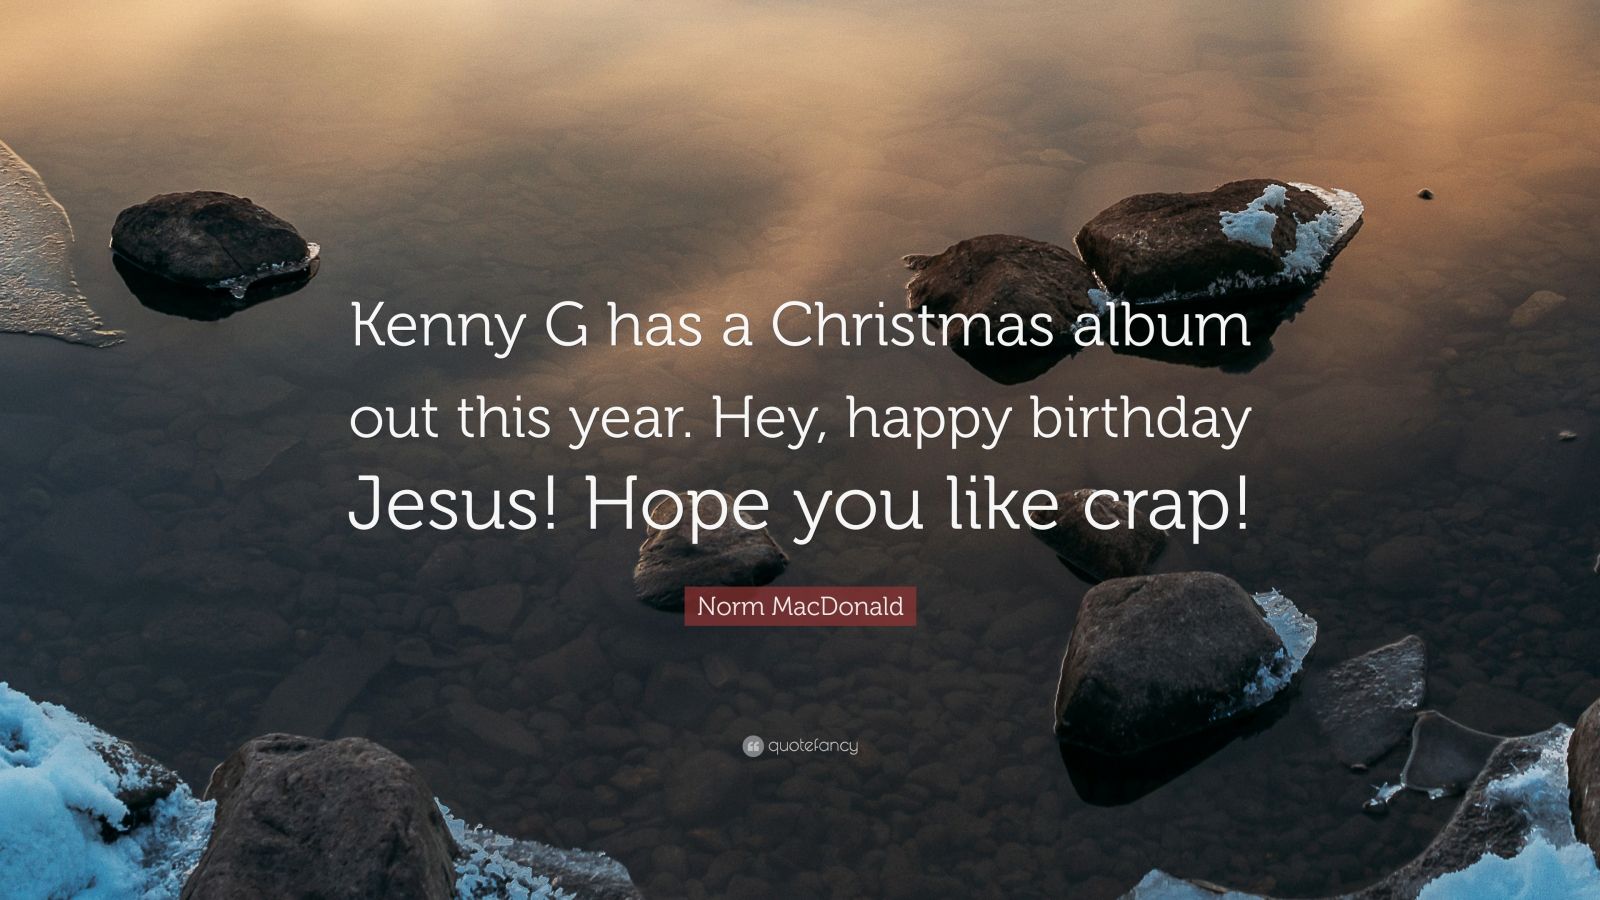 Norm MacDonald Quote: “Kenny G has a Christmas album out this year. Hey